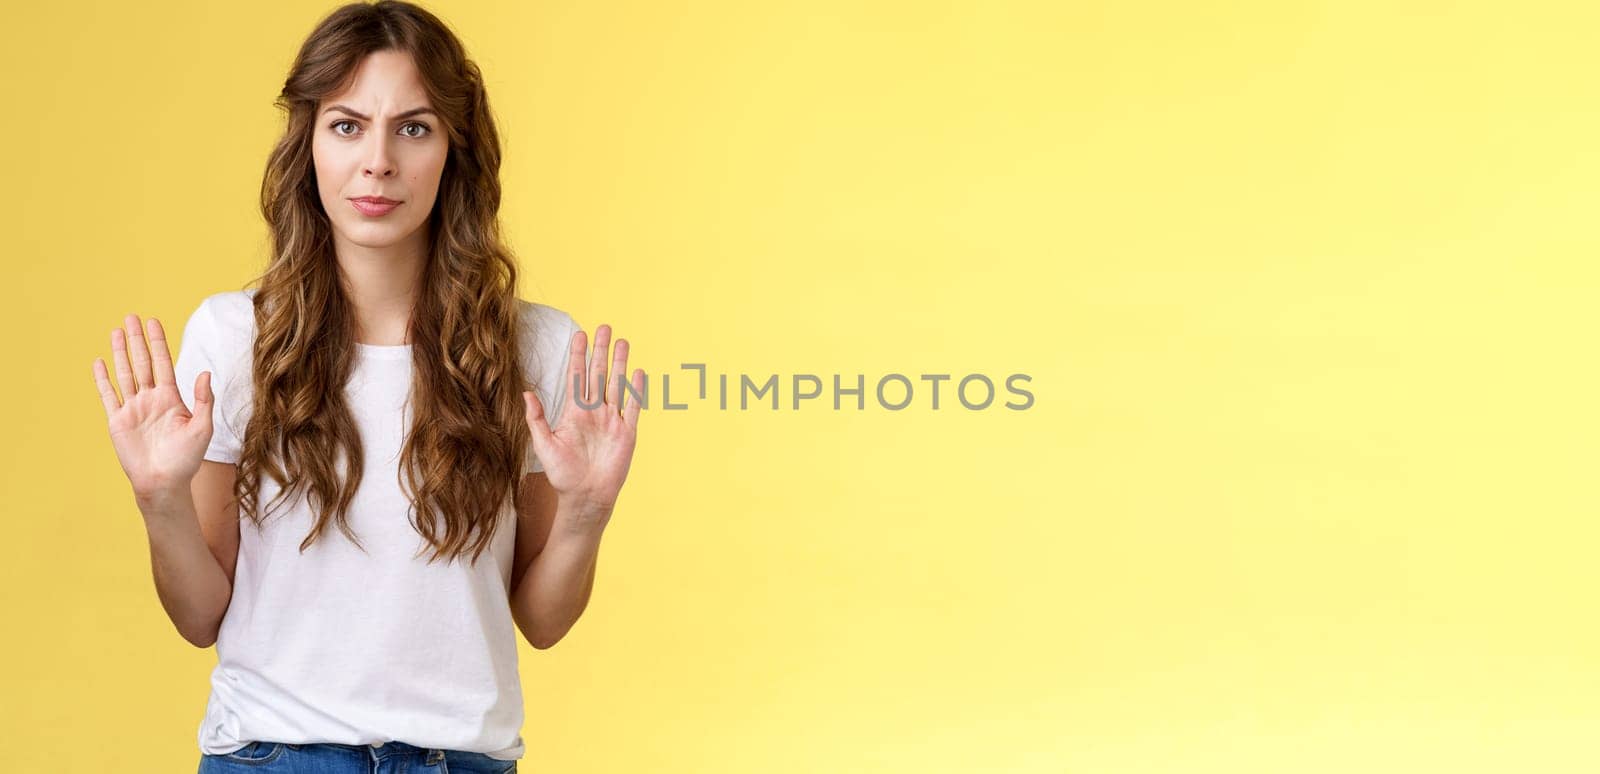 No thats enough. Serious-looking confident woman restrain man demand stay away give refusal look intense prohibit rejecting suspicious unpleasant offer stand yellow background. Copy space